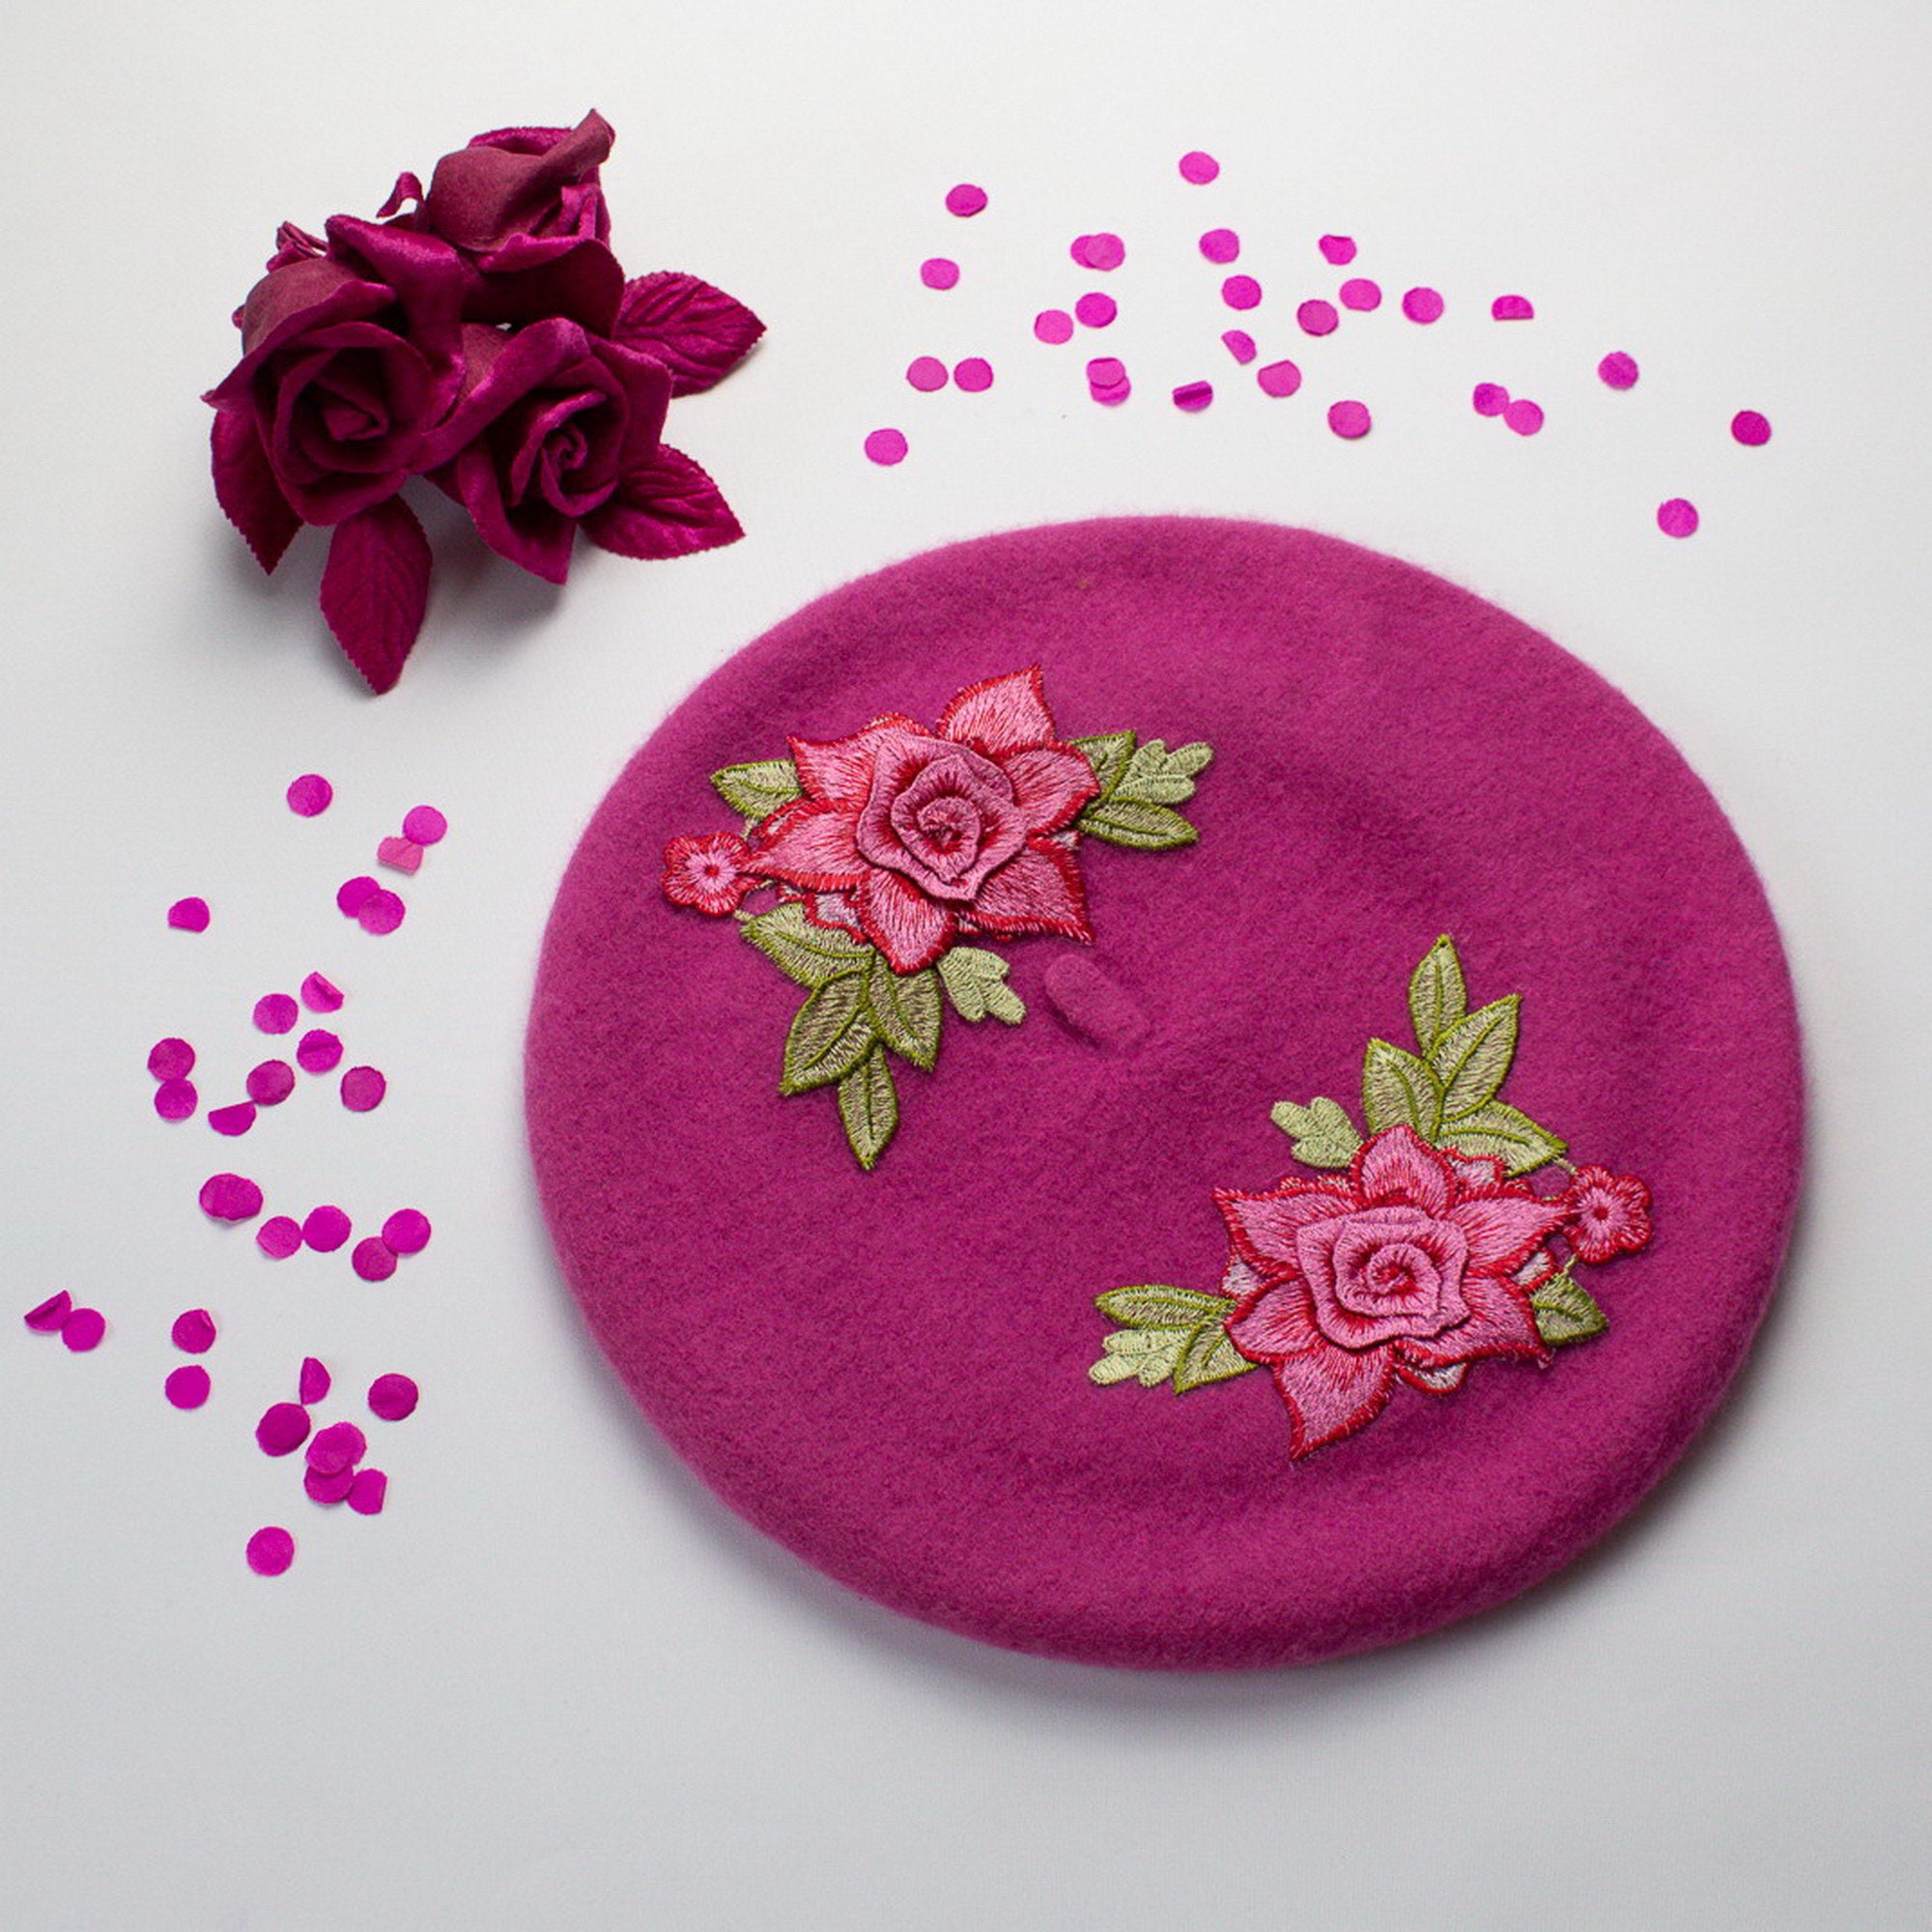 Pink Beret Hat With Embroidery Roses, Wool Felt Hat, French Women’s Winter